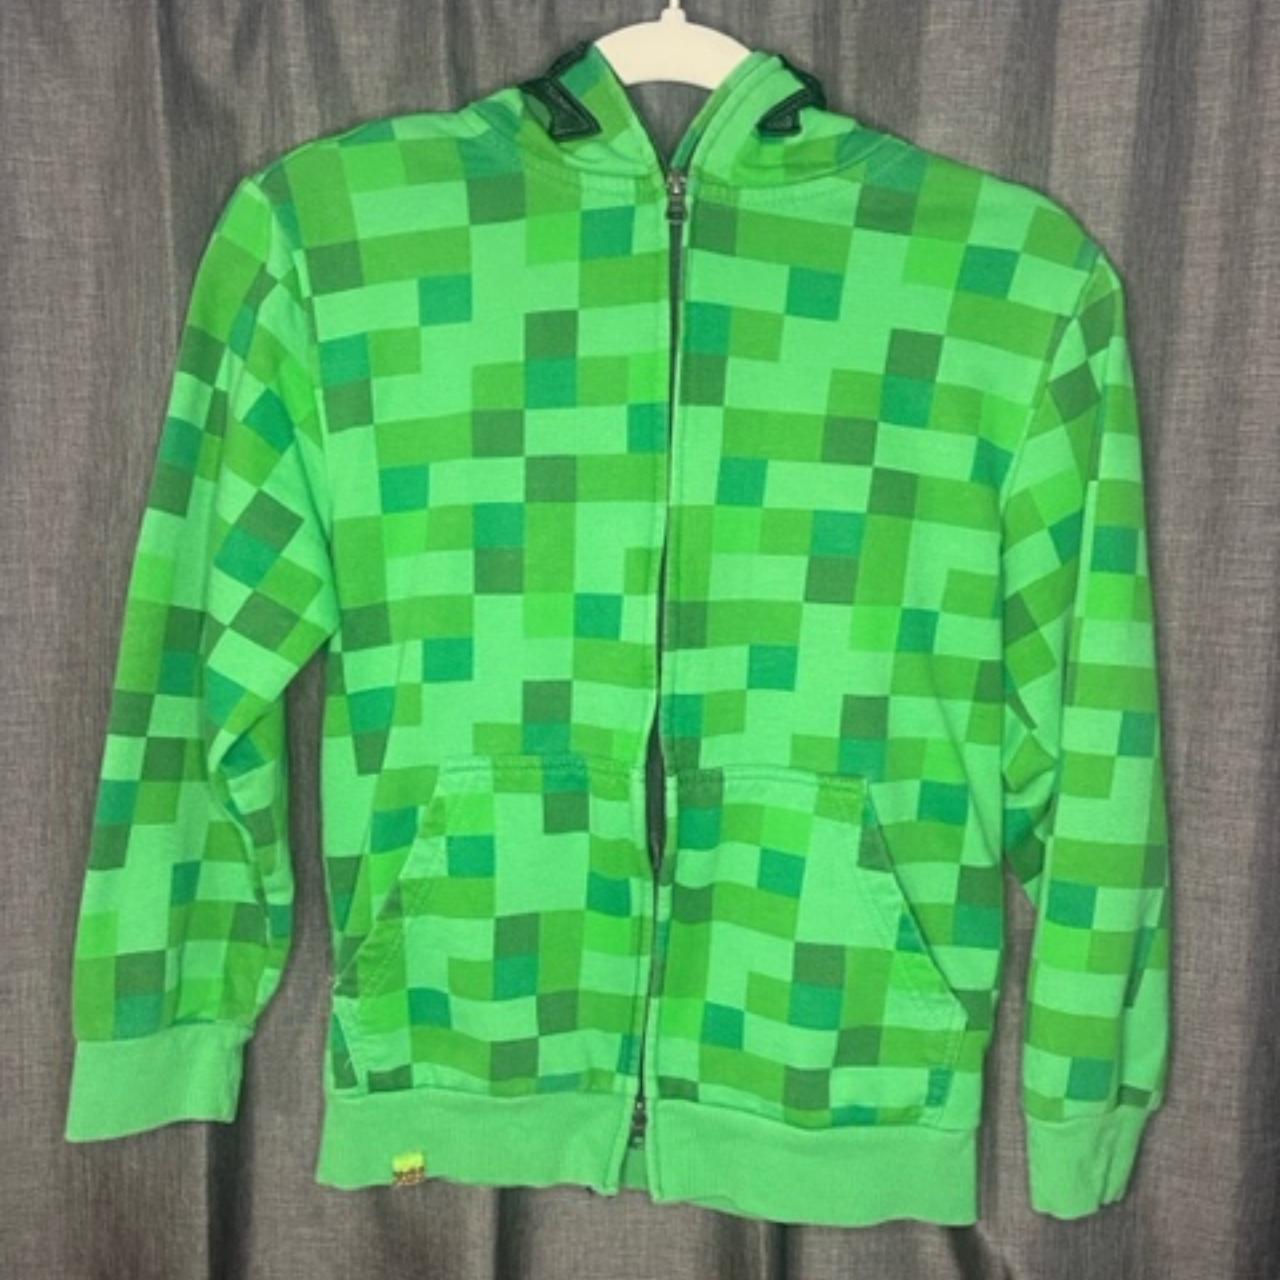 Brand new Minecraft Creeper Jacket. Only worn once,... - Depop